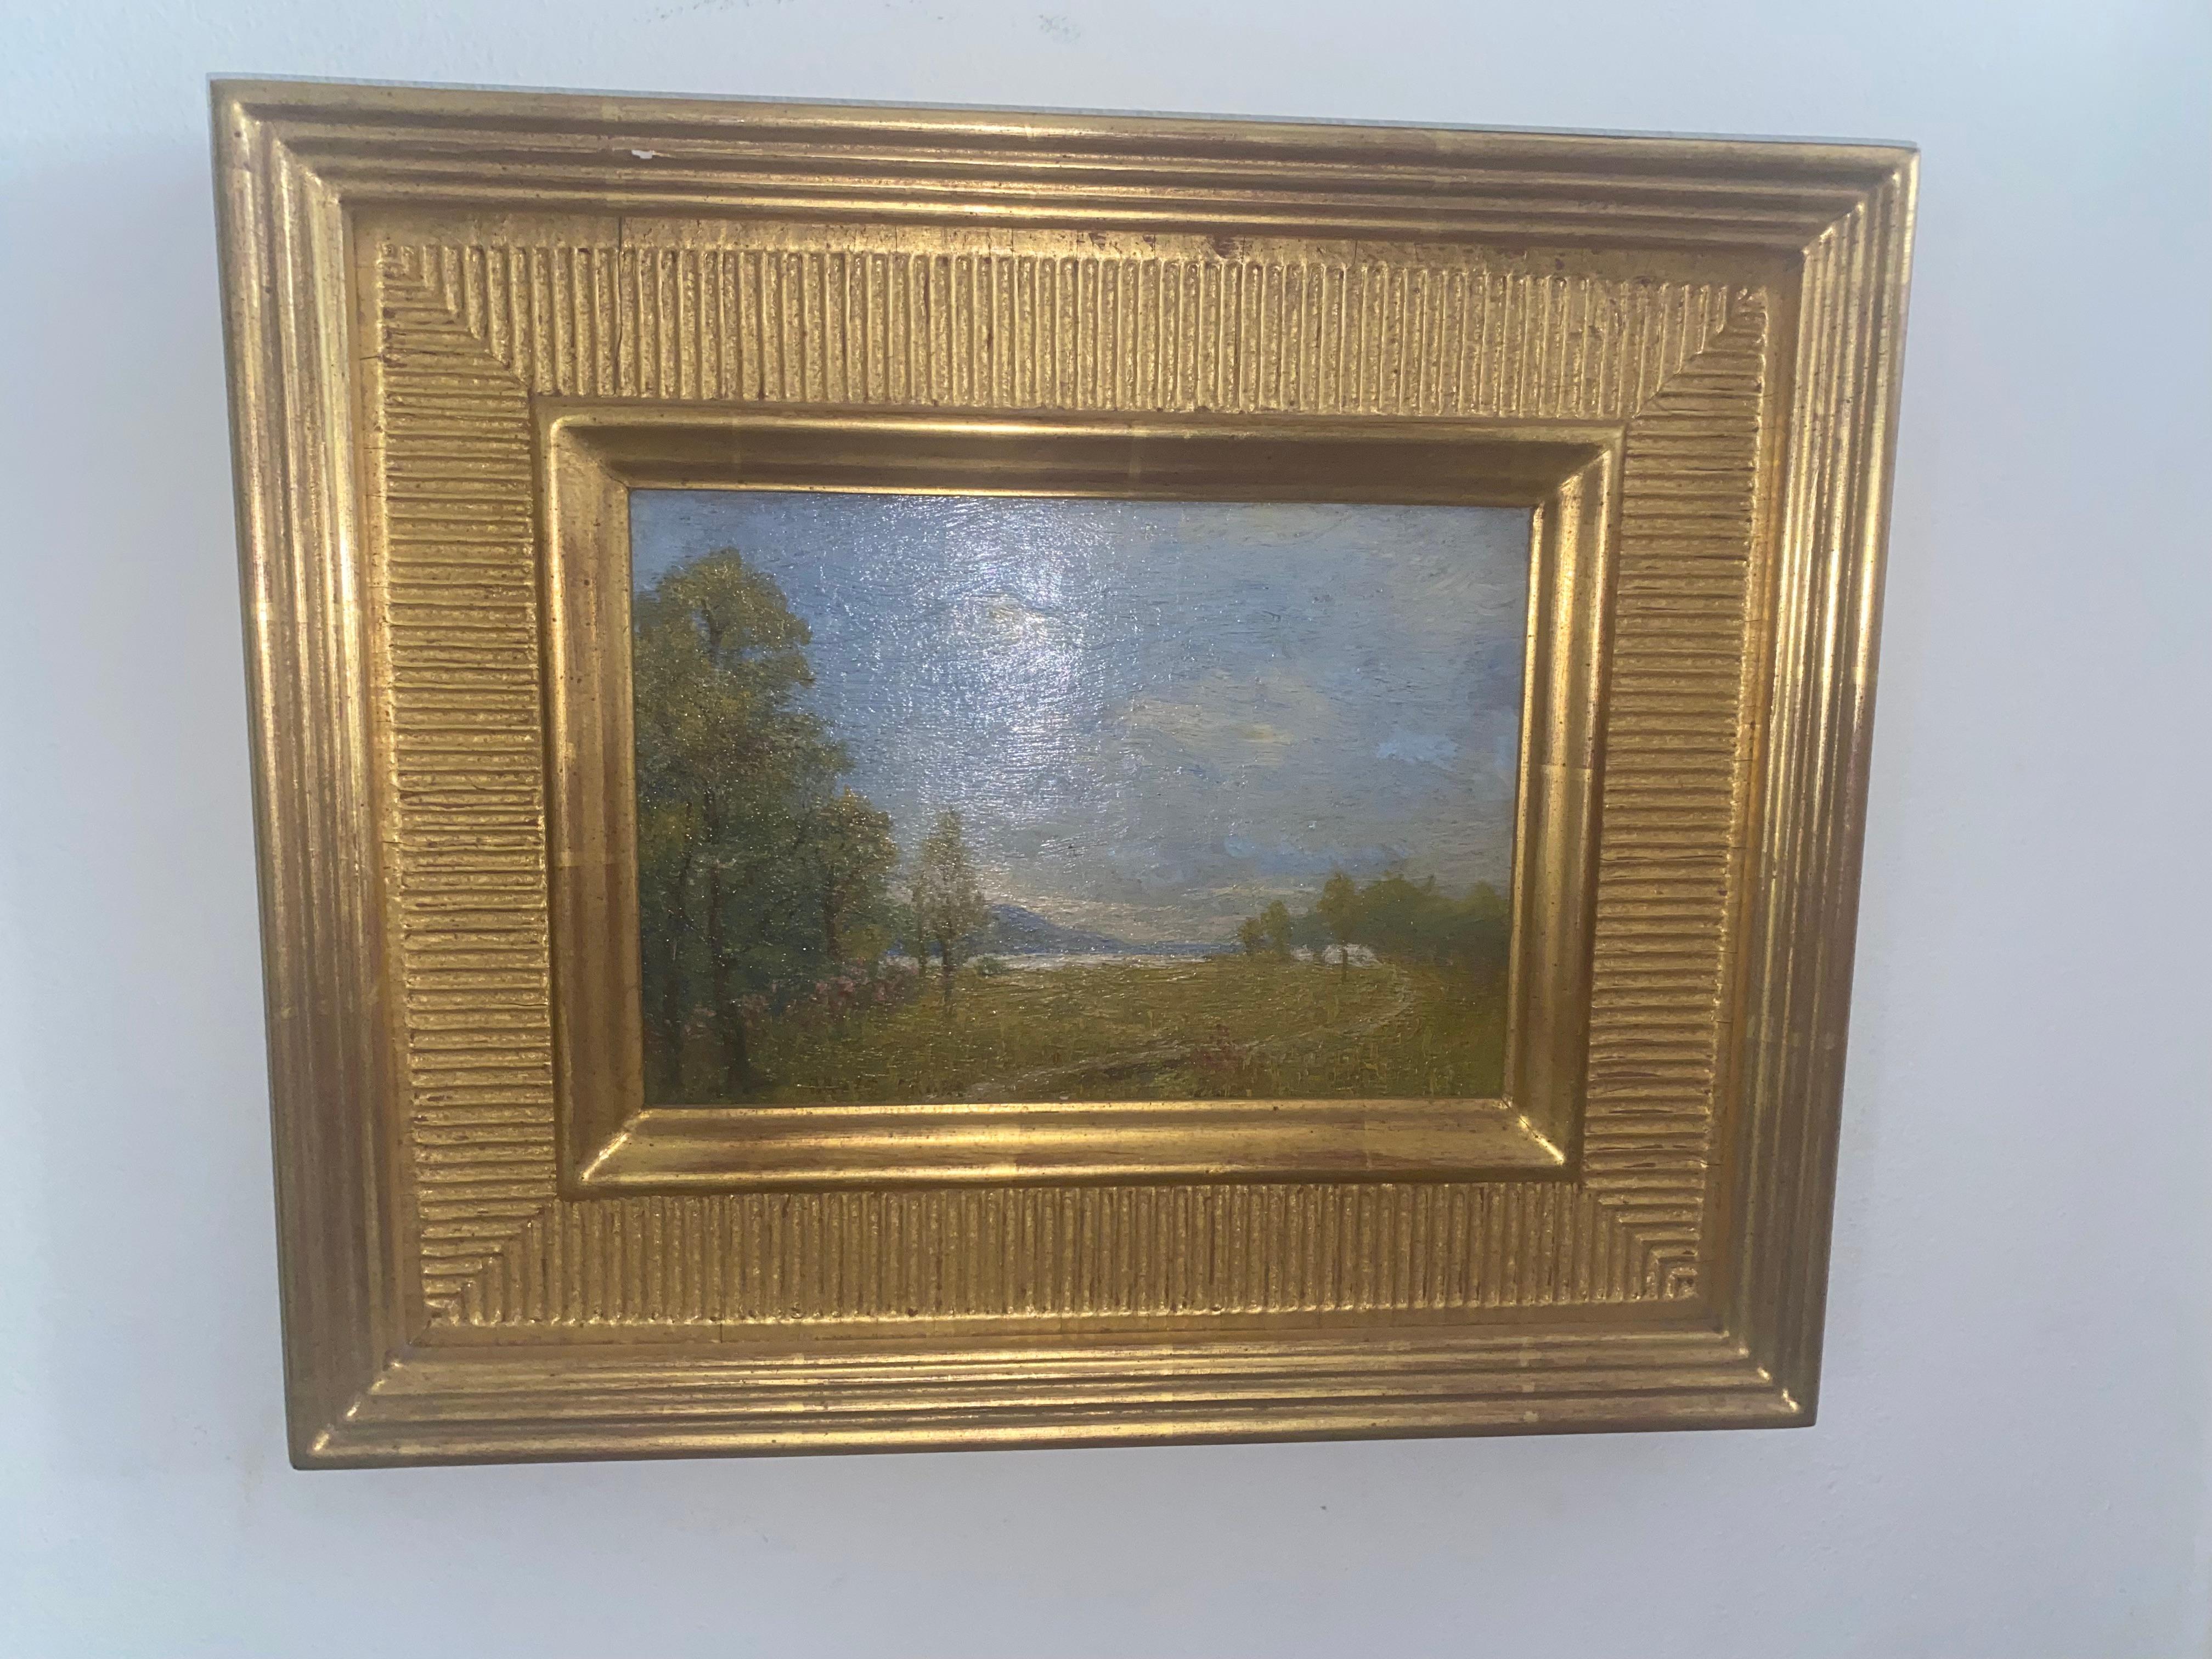 Bruce Crane pair of American impressionist landscape paintings in gilt frames.  Signed lower left.
With frame: 13.25” X 11” H 
Just painting: 7.5” X 5.25”. 

Bruce (Robert Bruce) Crane (1857 - 1937) was active/lived in Connecticut, New York. He is